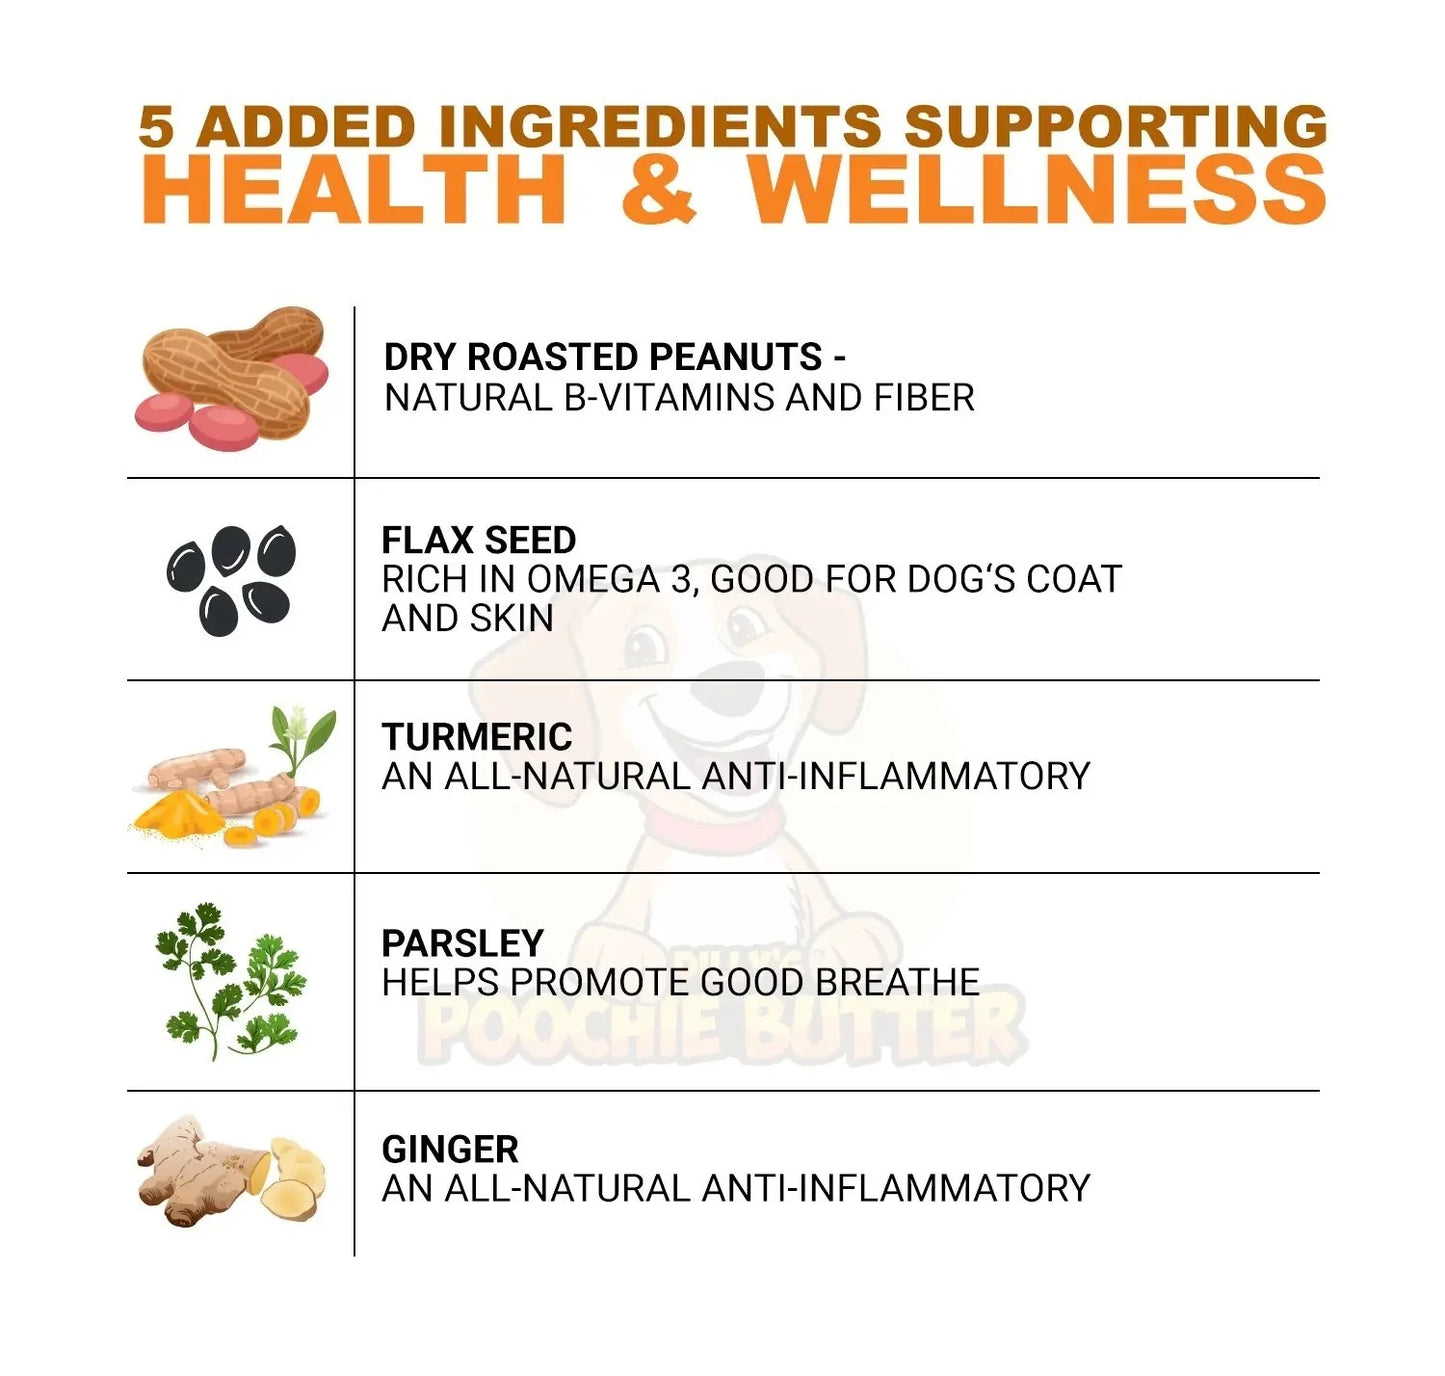 Image of the 5 added ingredients used to make the peanut butter which support health & wellness. Manufacturer states, ingredients & benefits are: dry roasted peanuts which have natural B-vitamins and fiber. Flaxseed which is rich in omega 3, good for dog's coat and skin. Turmeric which is an all-natural anti-inflammatory. Parsley which helps promote good breath. Ginger which is also an all-natural anti-inflammatory.